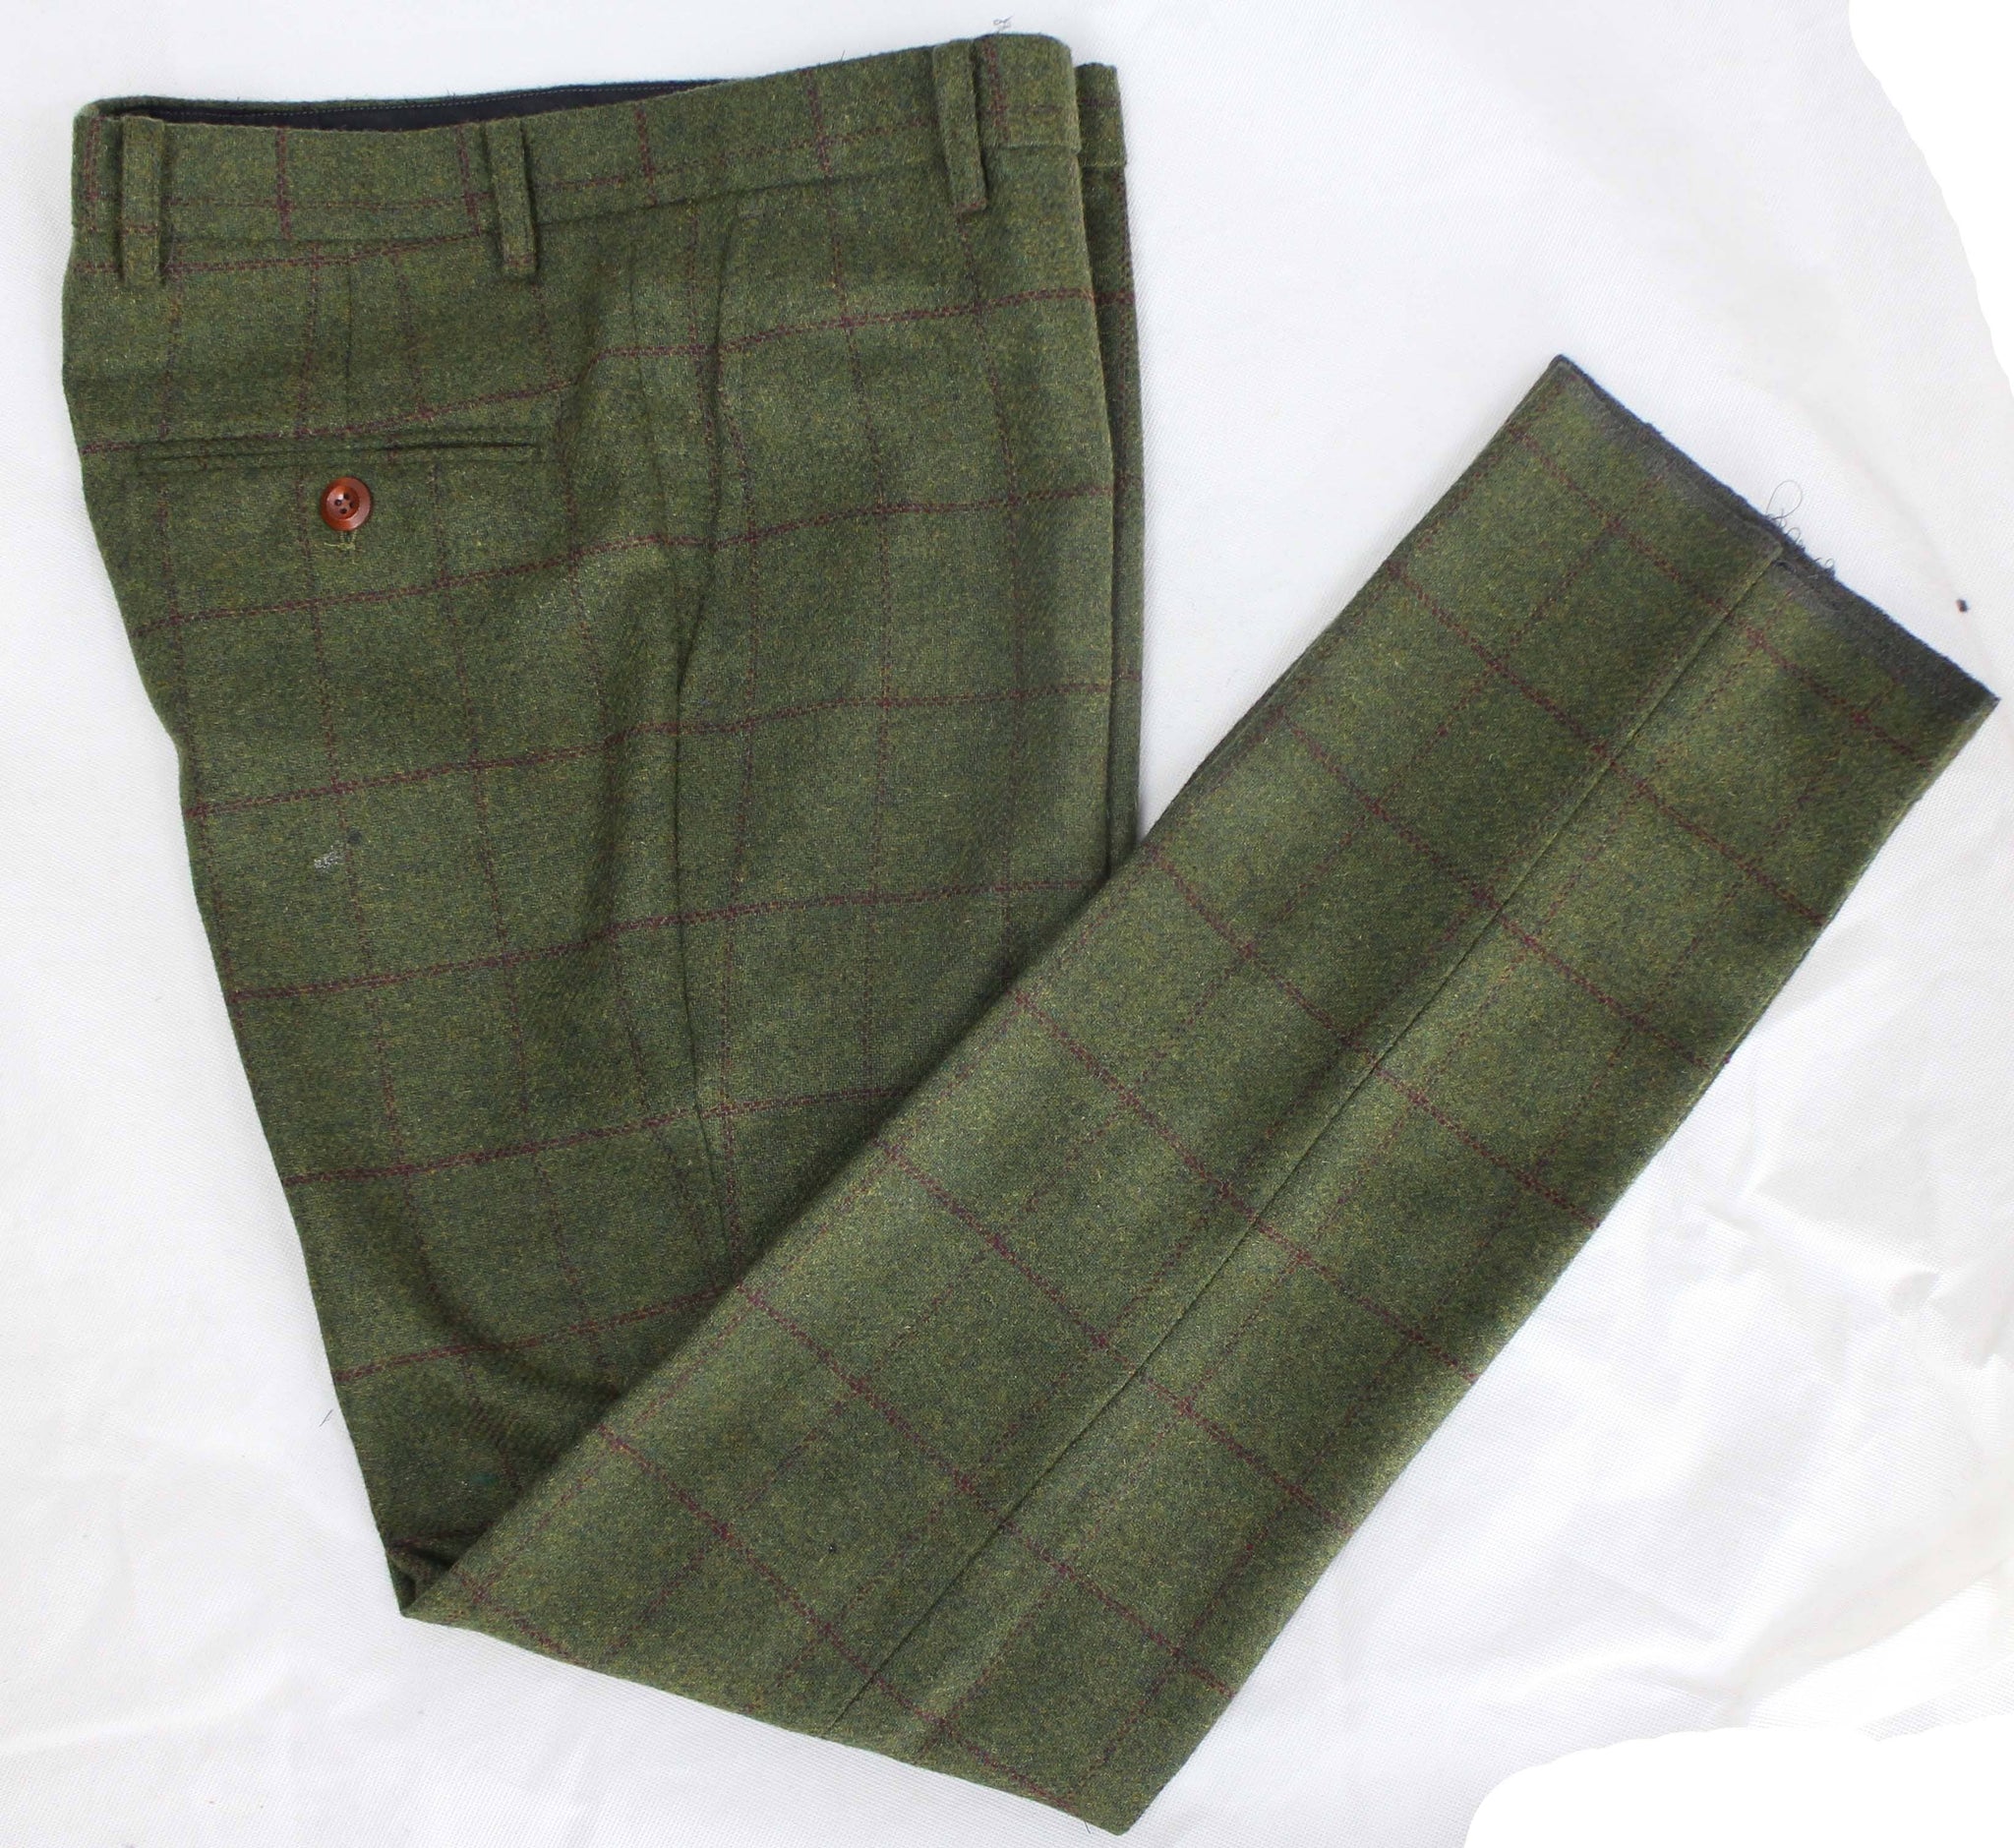 Olive Green Check Tweed 3 Piece Suit